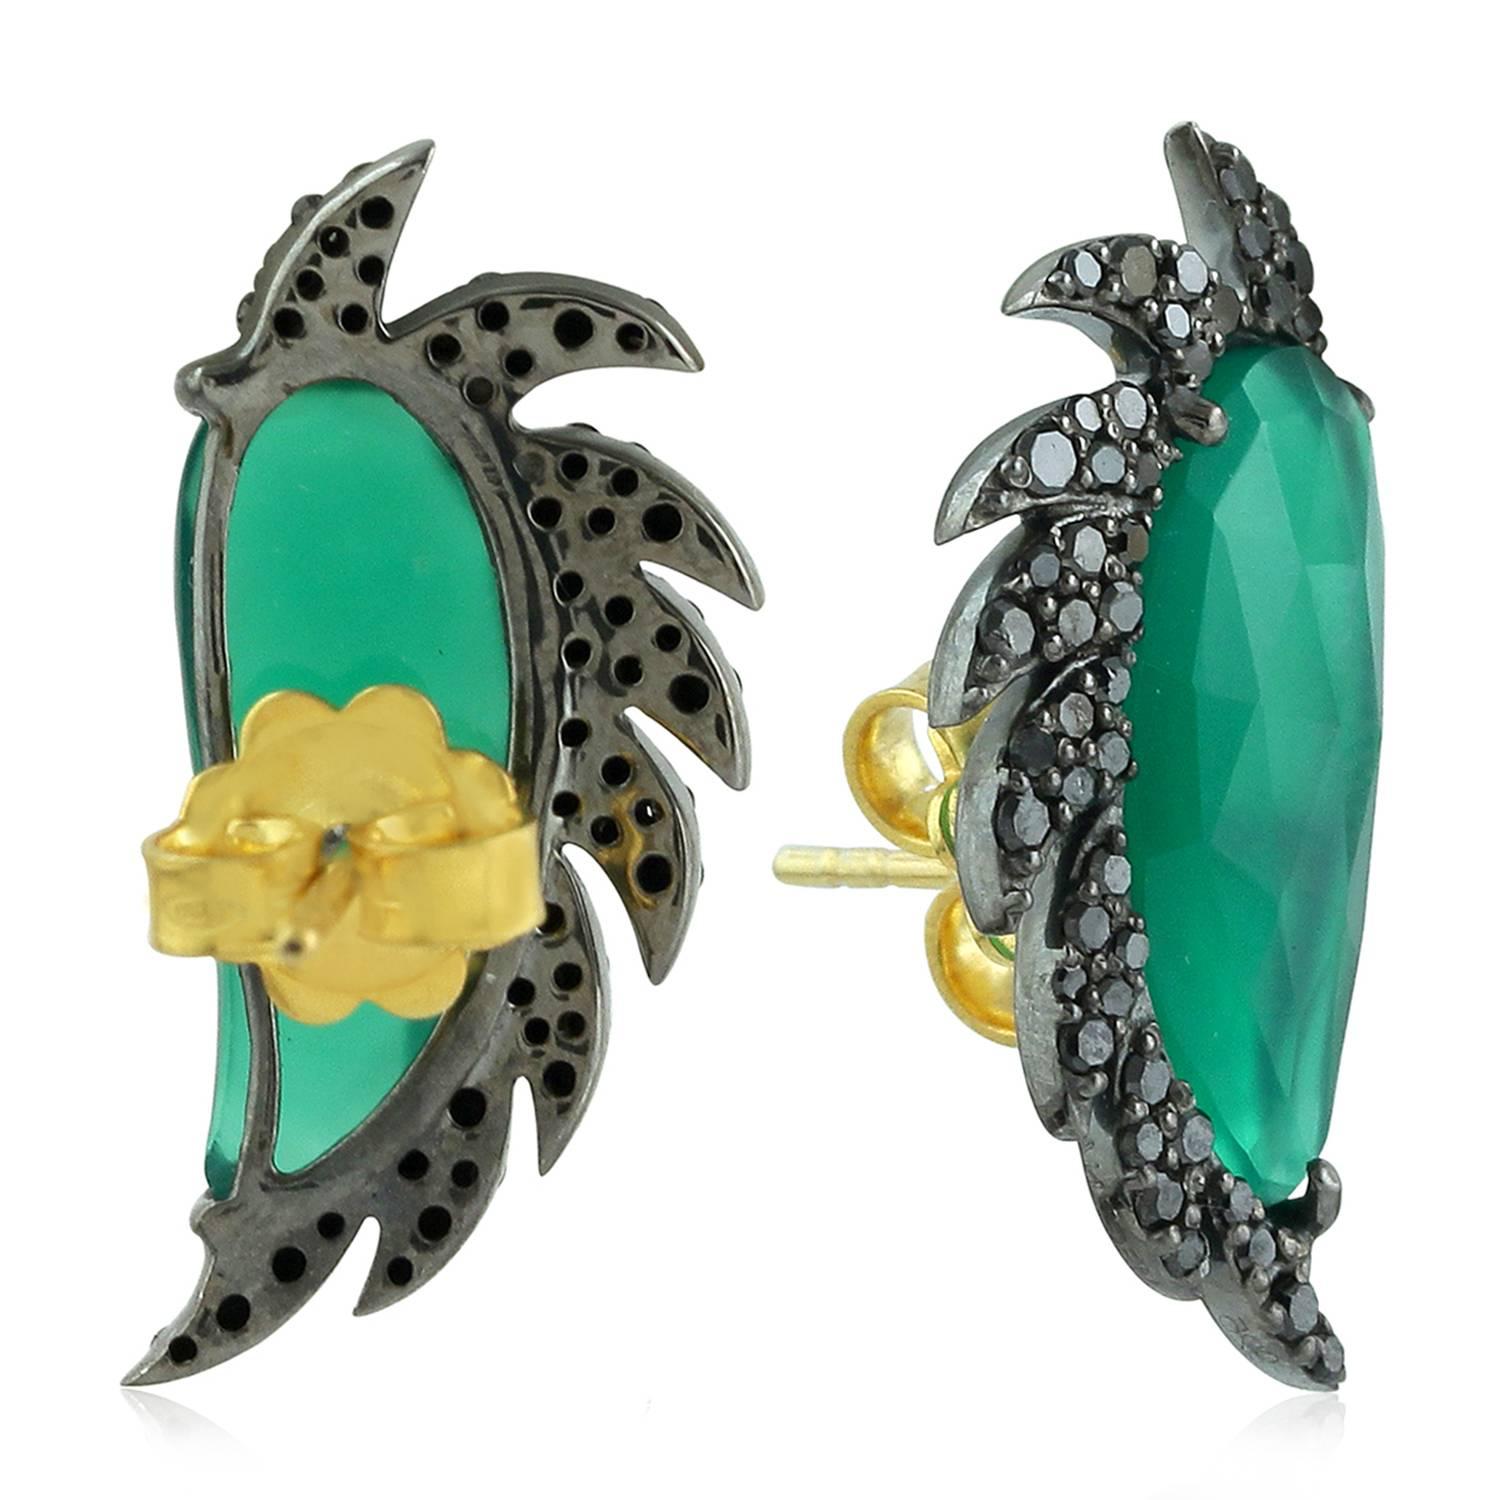 These distinctive stud earrings are modern twist to fine jewelry.. Handcrafted in 14K gold, sterling silver, green chalcedony and black diamonds. The iridescent 16.0-ct rose cut green chalcedony is surrounded by 0.67-ct signature diamond pave